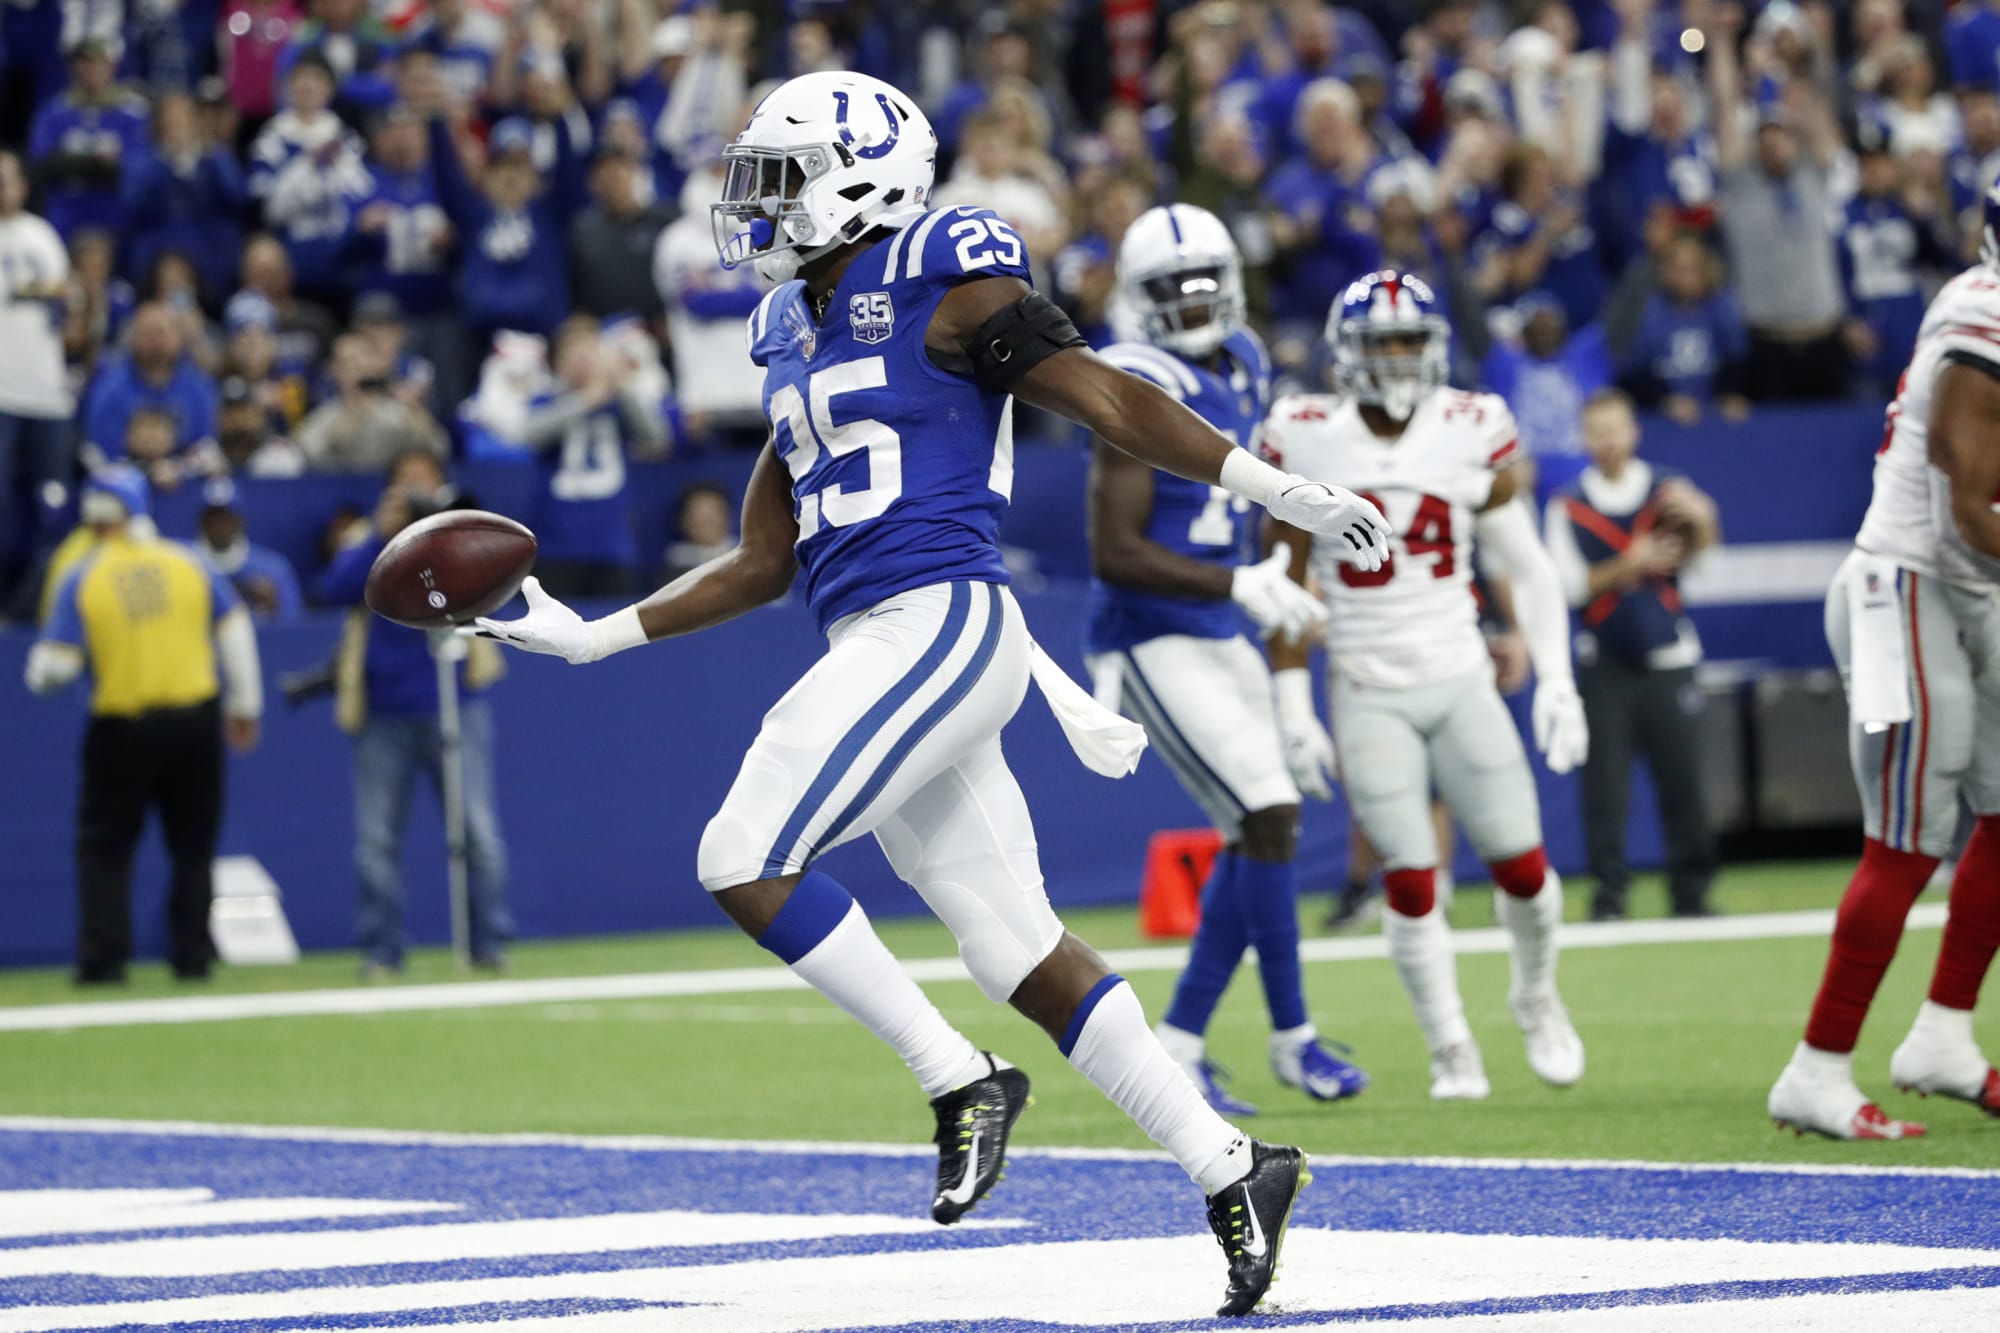 Colts survive Giants, keep playoff hopes alive